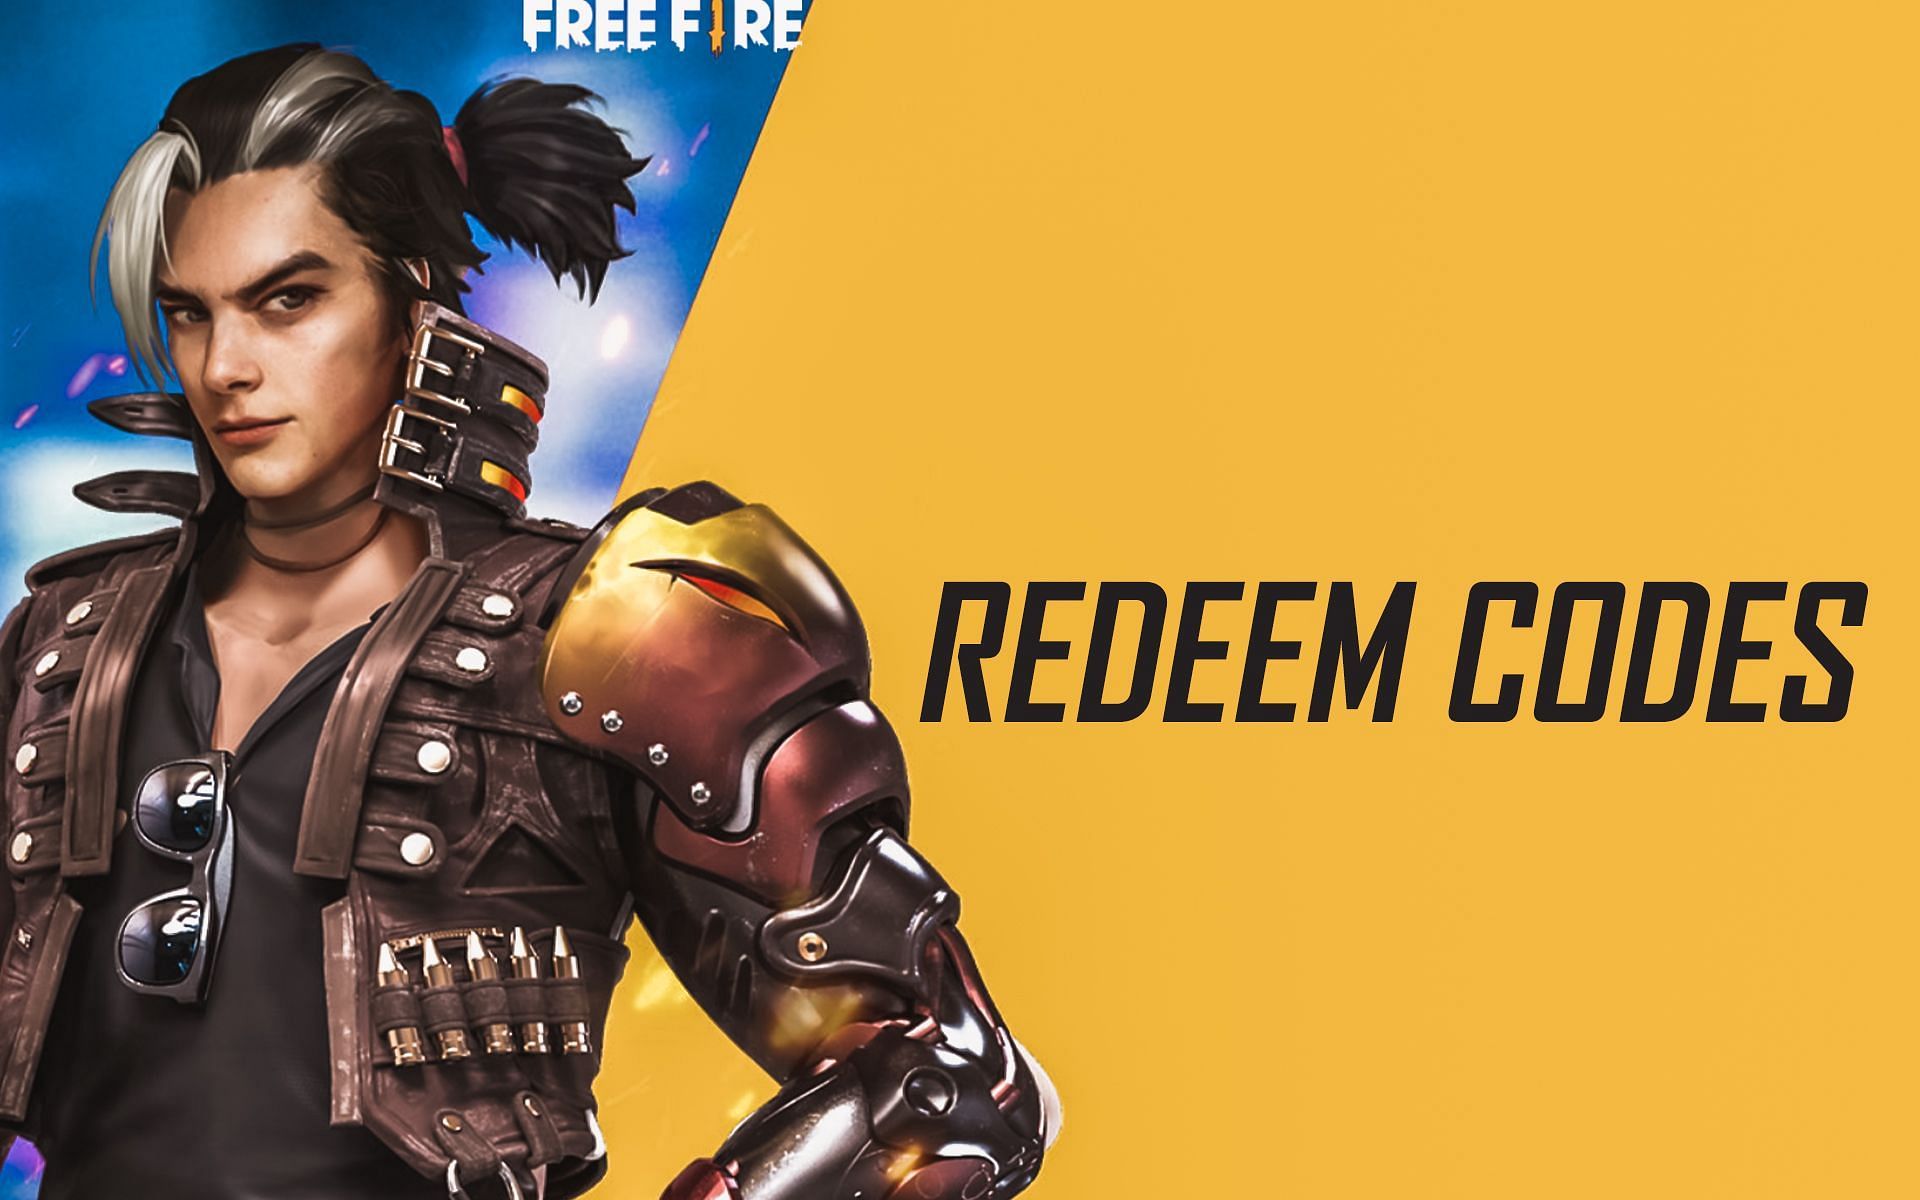 Redeem codes can give players several free rewards in Free Fire (Image via Free Fire)